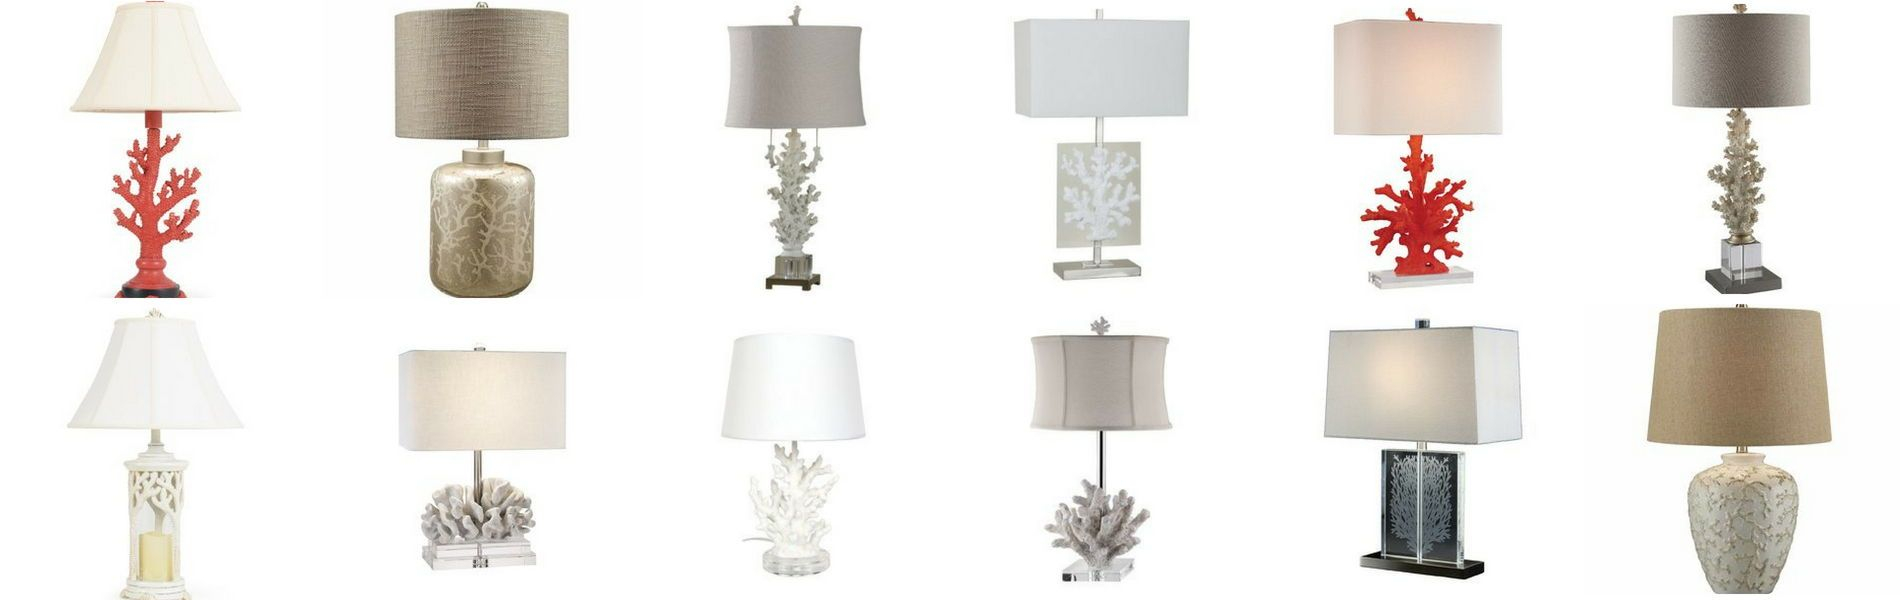 Coral Lamps Discover The Best Coral Themed Table Lamps And intended for size 1900 X 600